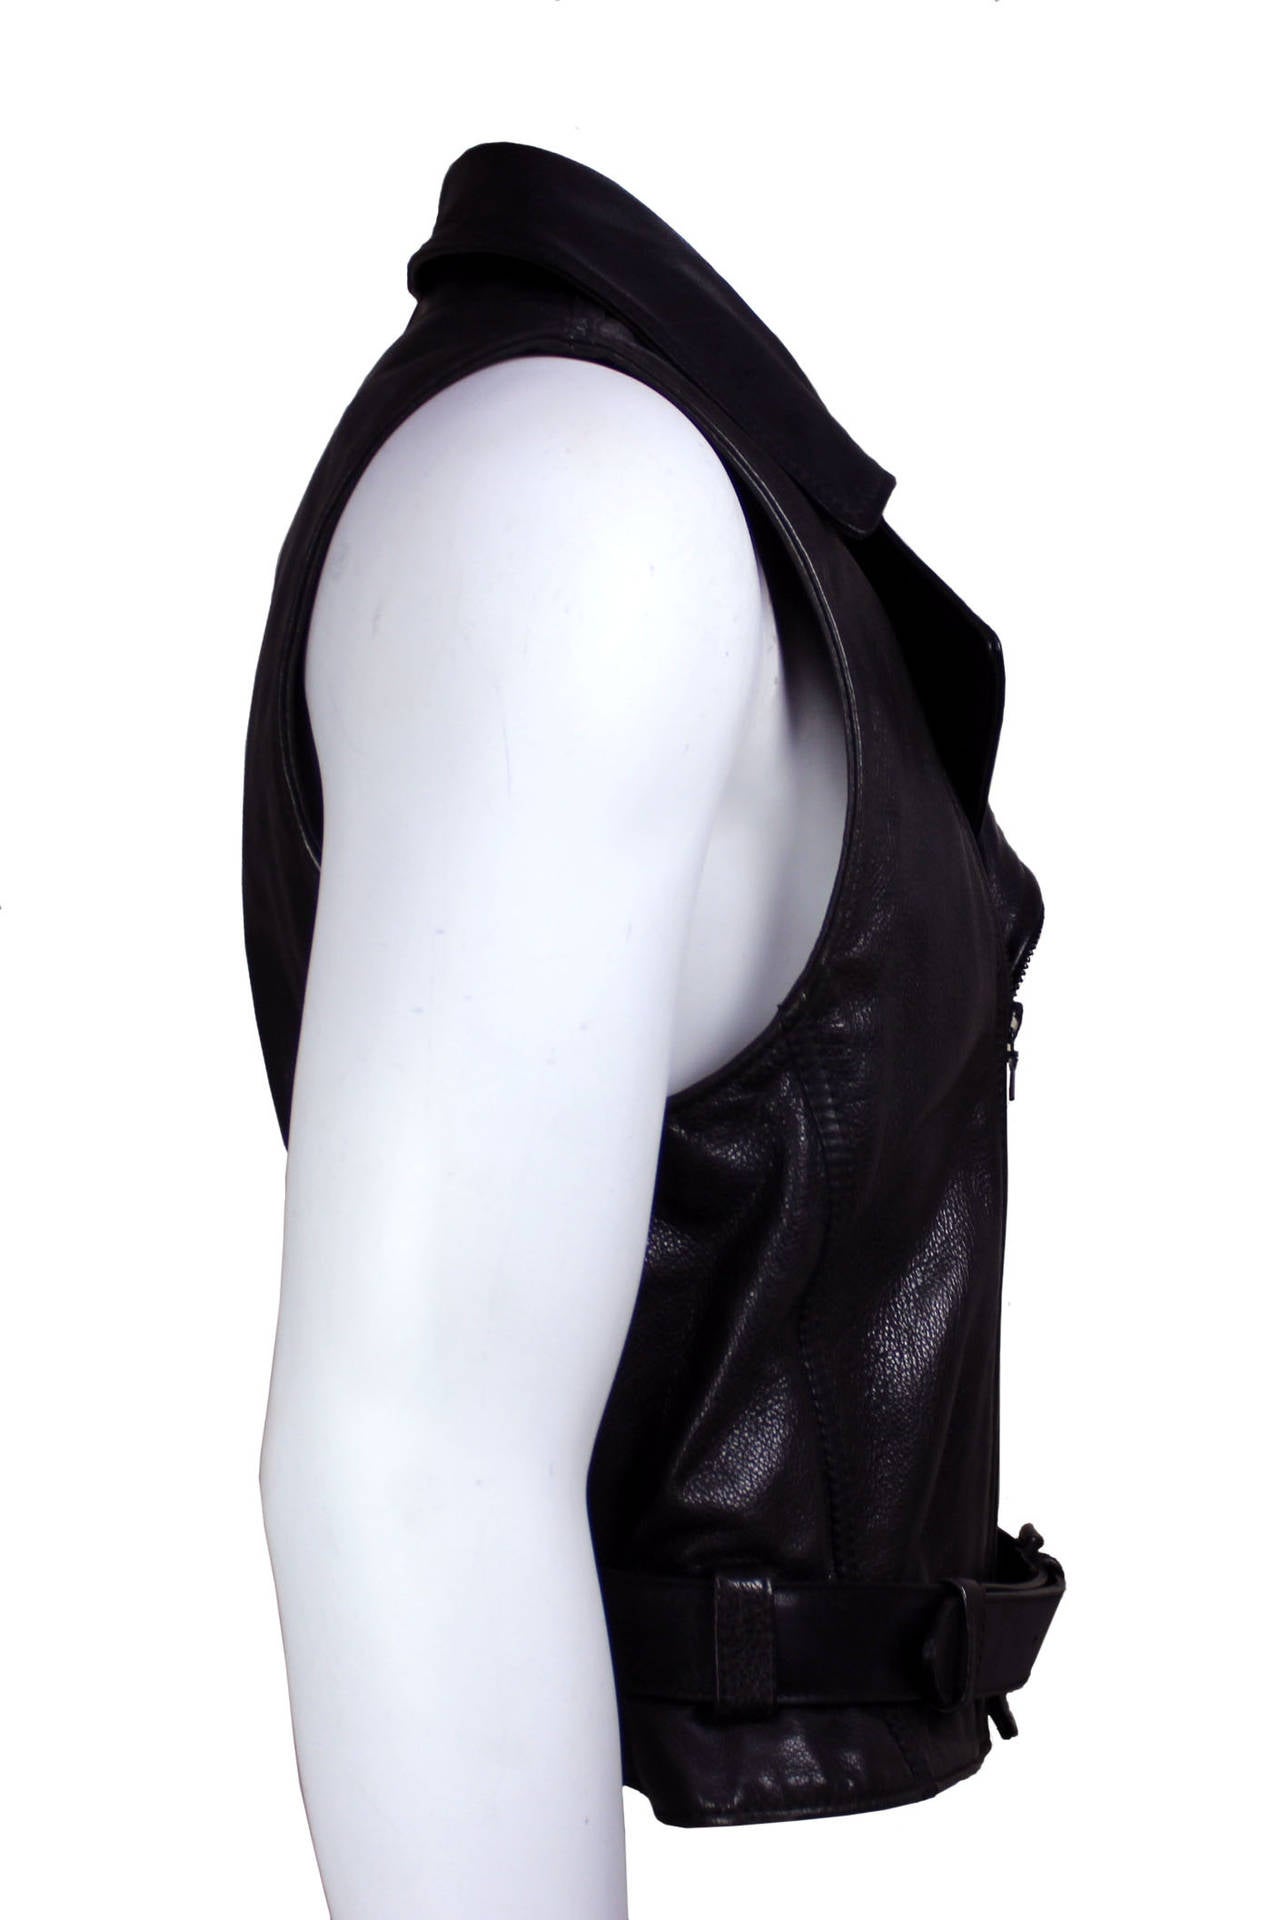 Ruffo Black Leather Motorcycle Vest In Excellent Condition For Sale In New York, NY